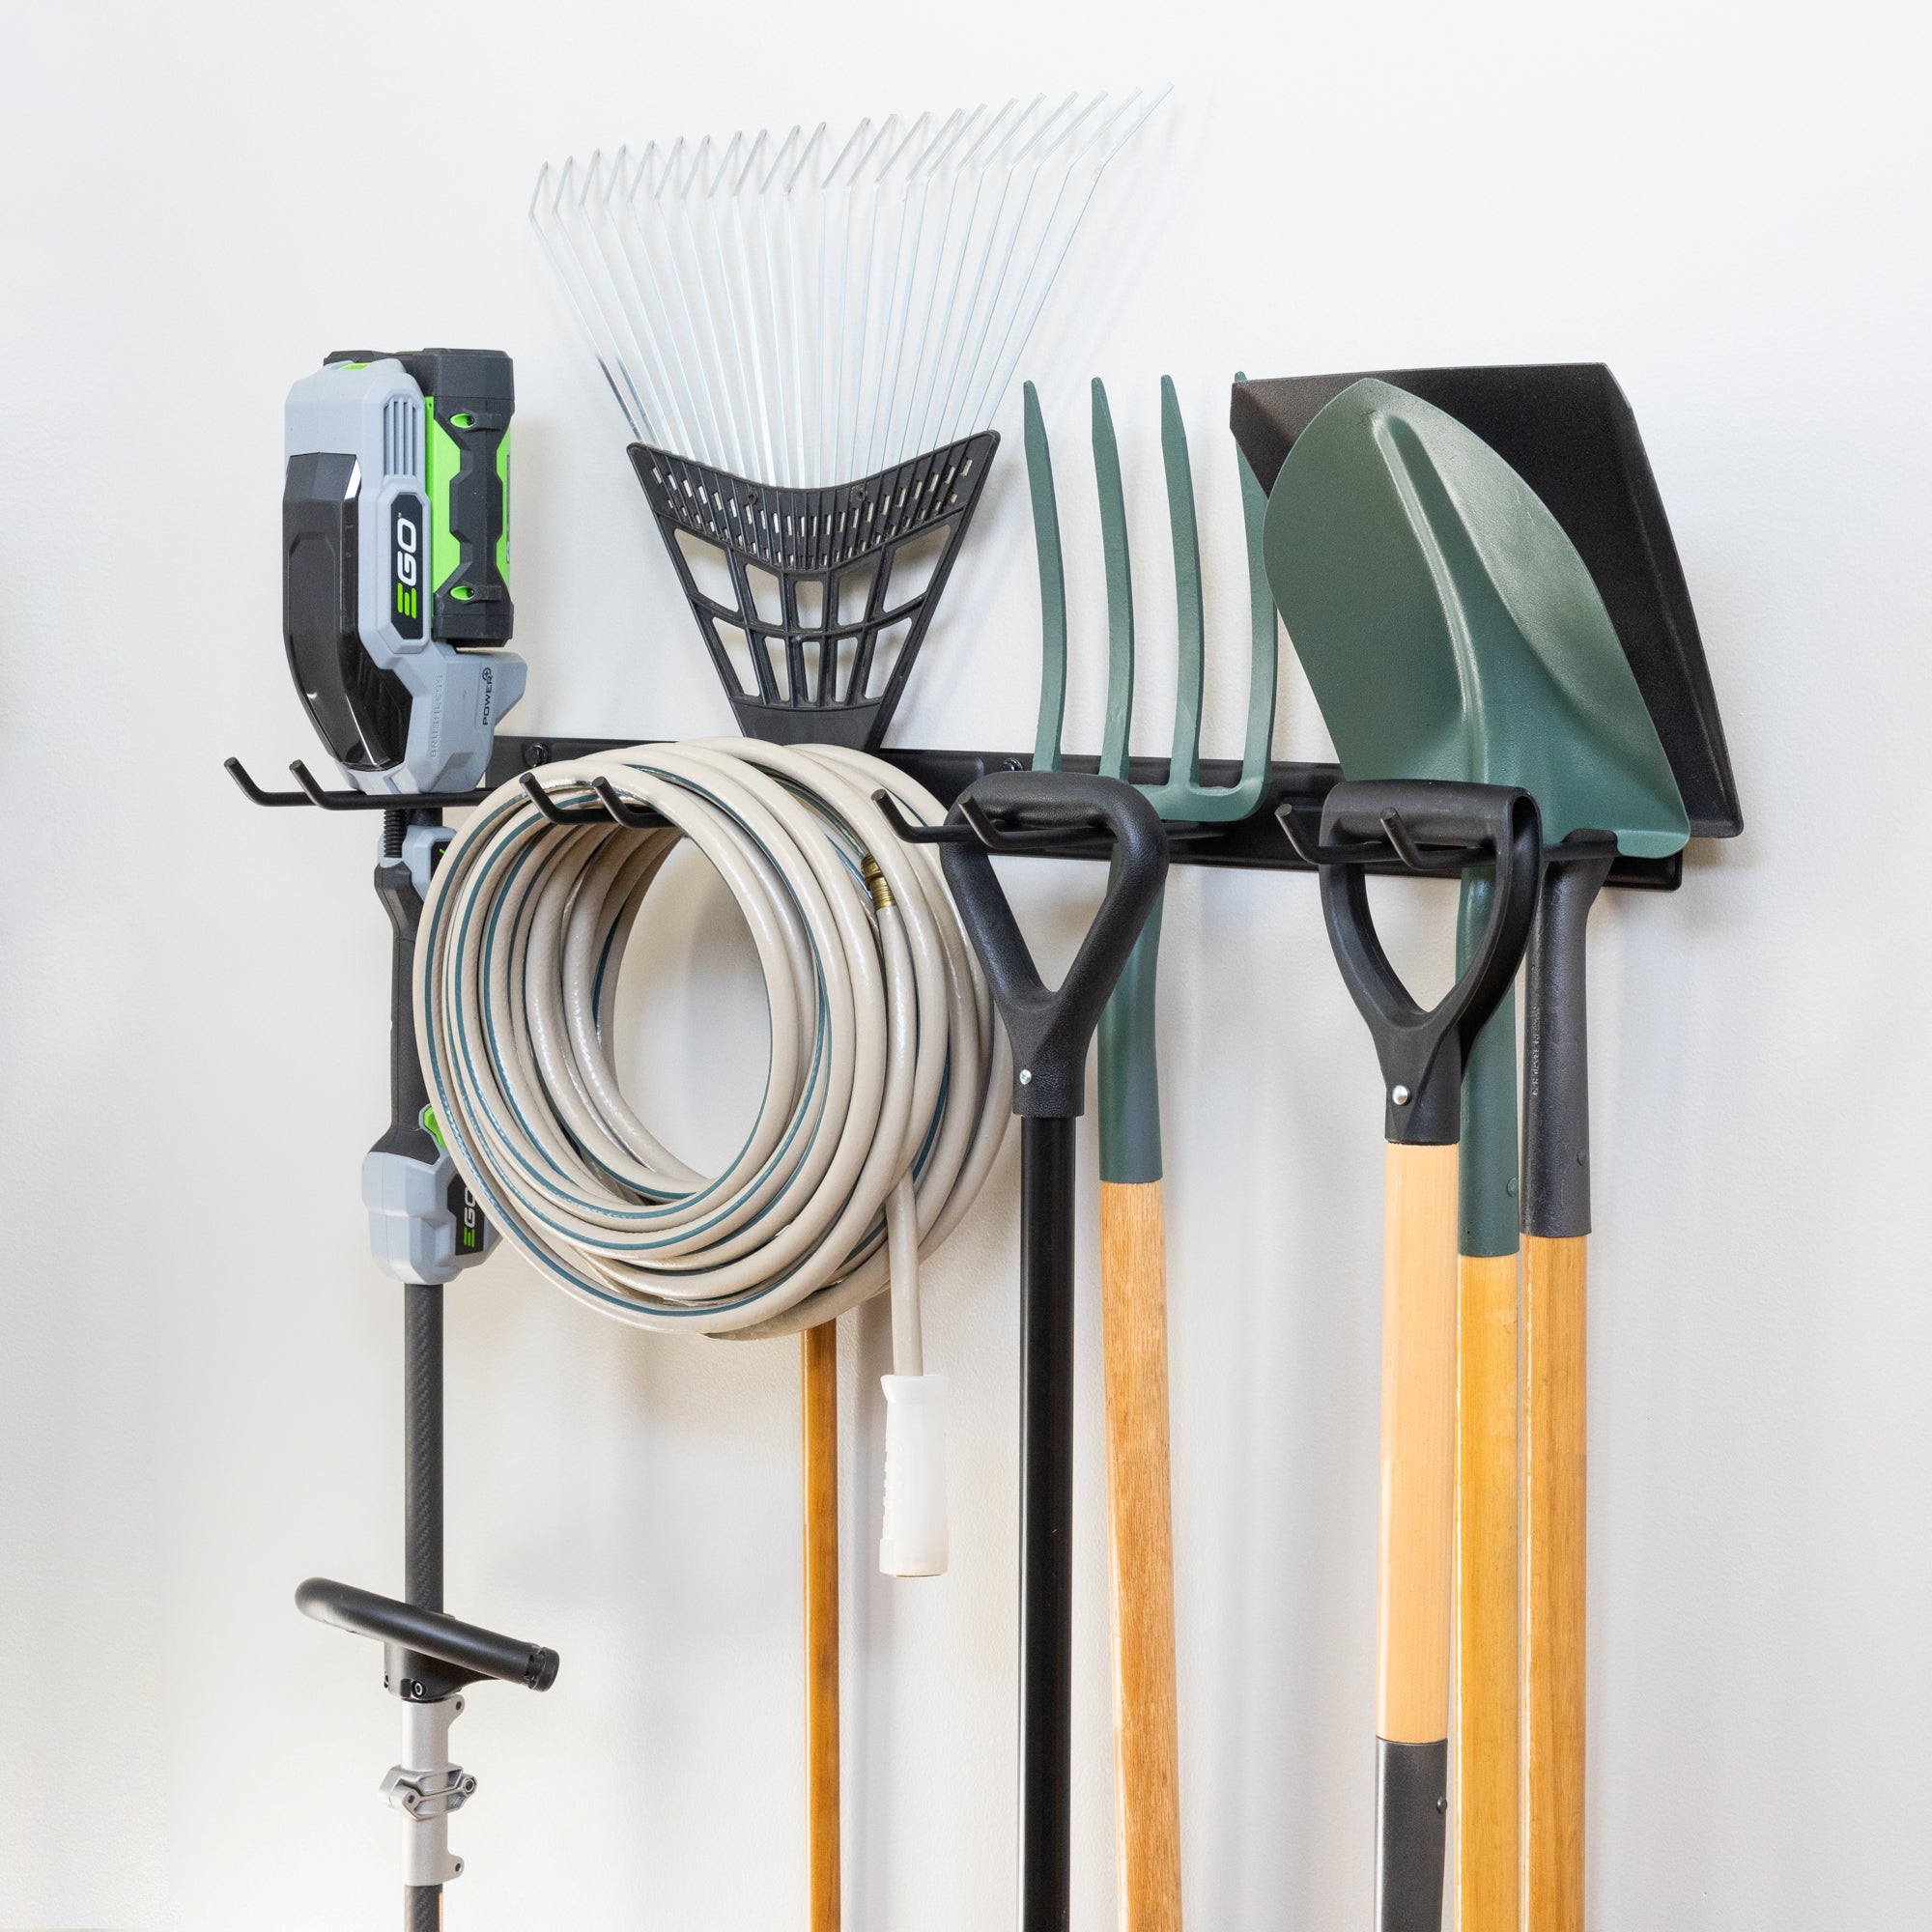 Tool Racks  Home and Garage Storage for Lawn and Power Tools, Shovels,  Rakes, and Drills – StoreYourBoard